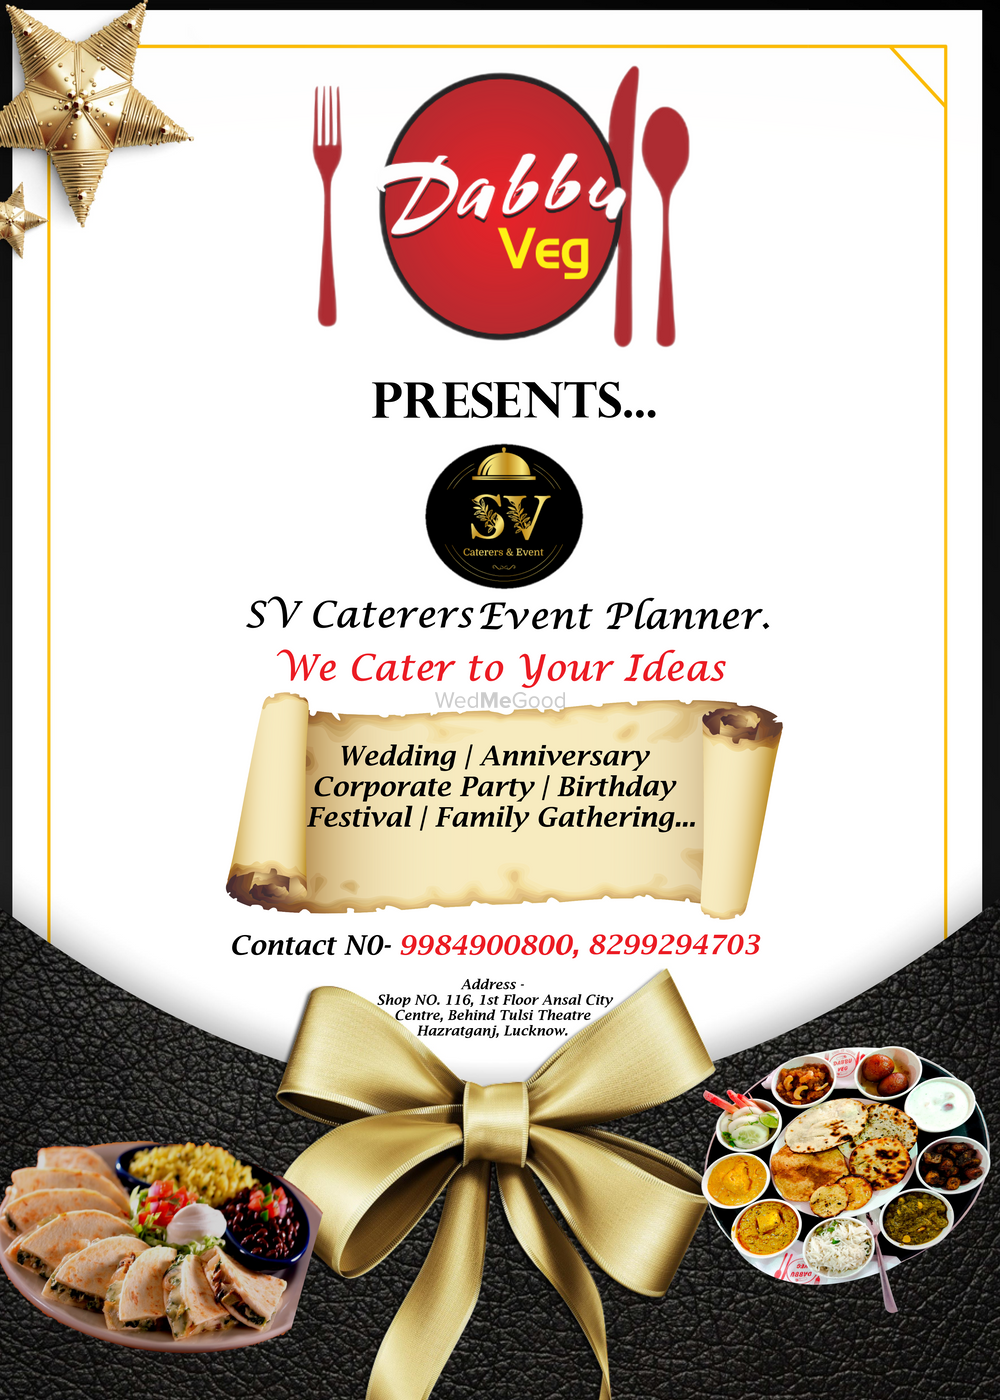 Photo By SV Caterers and Event Planner - Catering Services